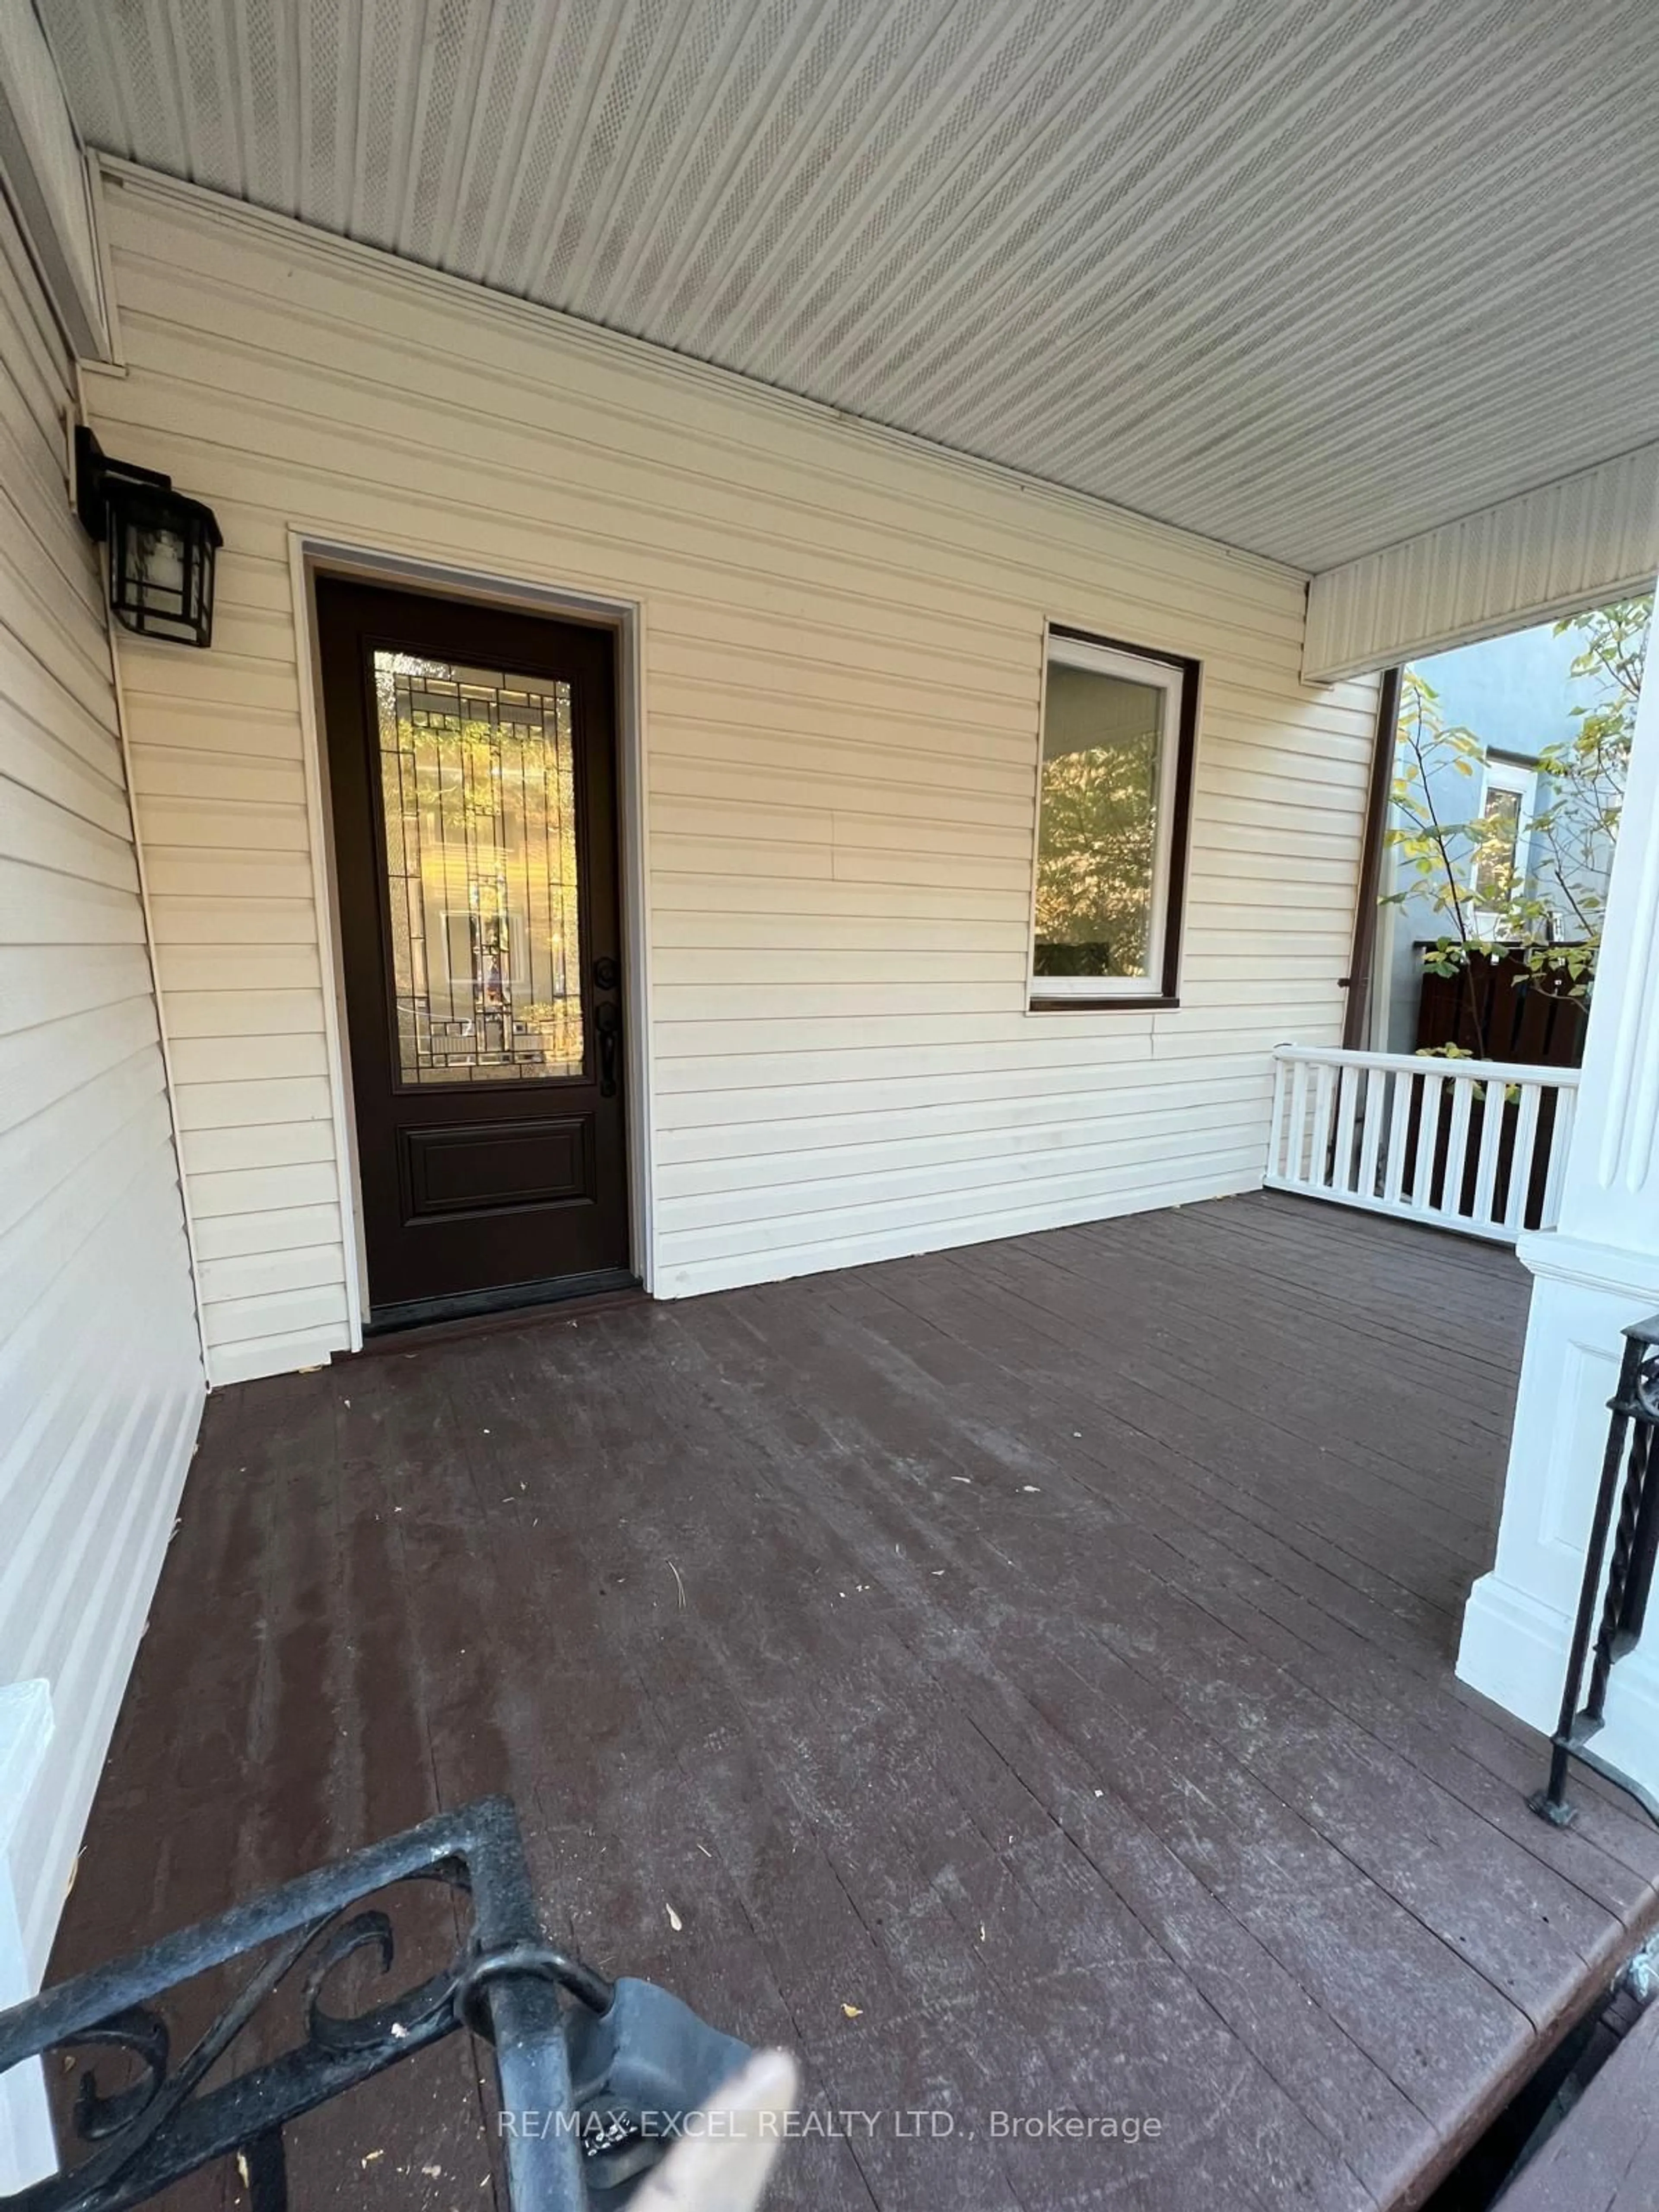 Indoor entryway for 119 Colborne St, Oshawa Ontario L1G 1M3